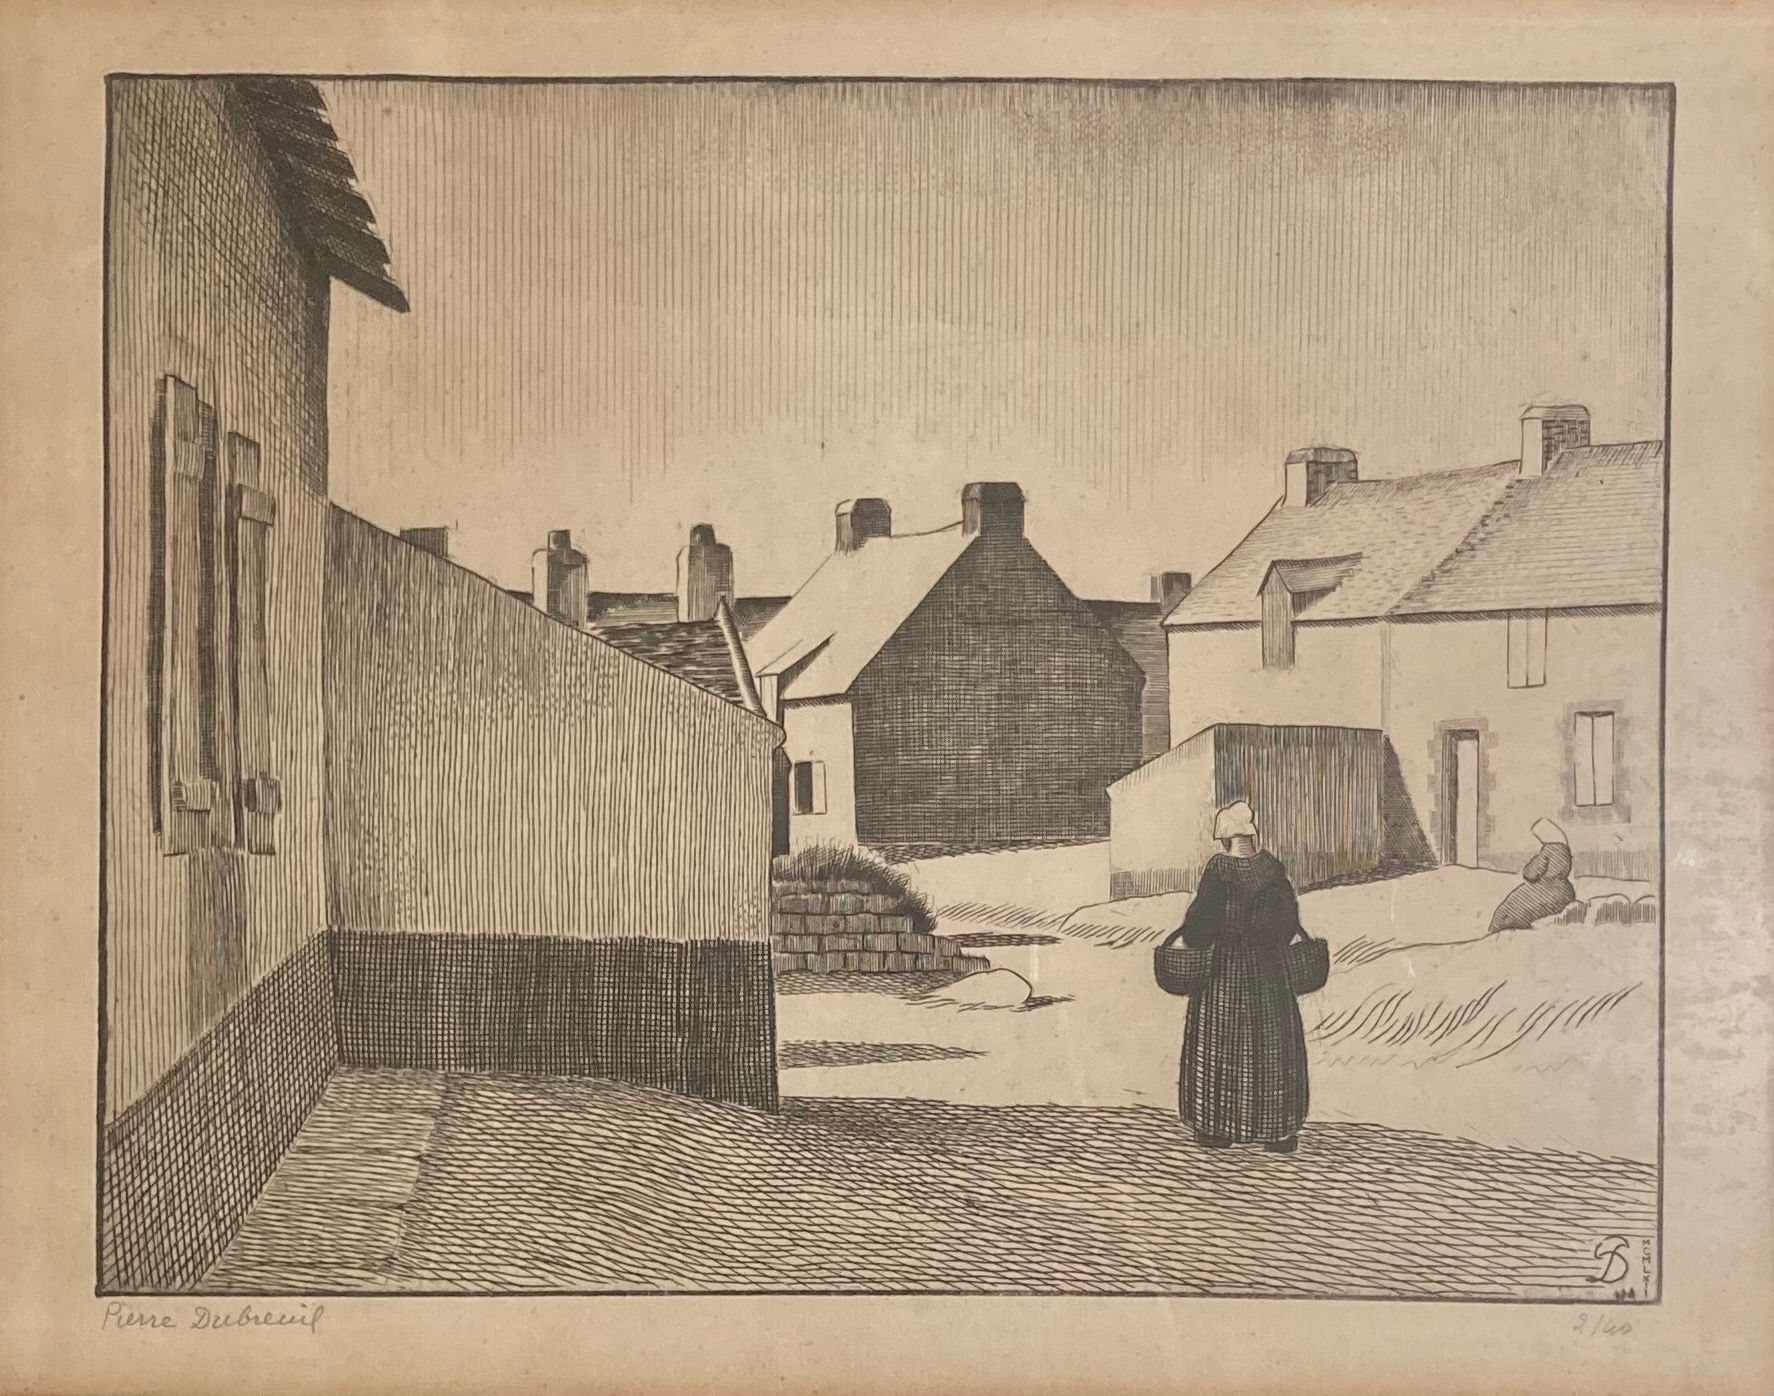 Pierre DUBREUIL (1891-1970): VILLAGE BRETON ANIMATED.
Etching, monogrammed in th&hellip;